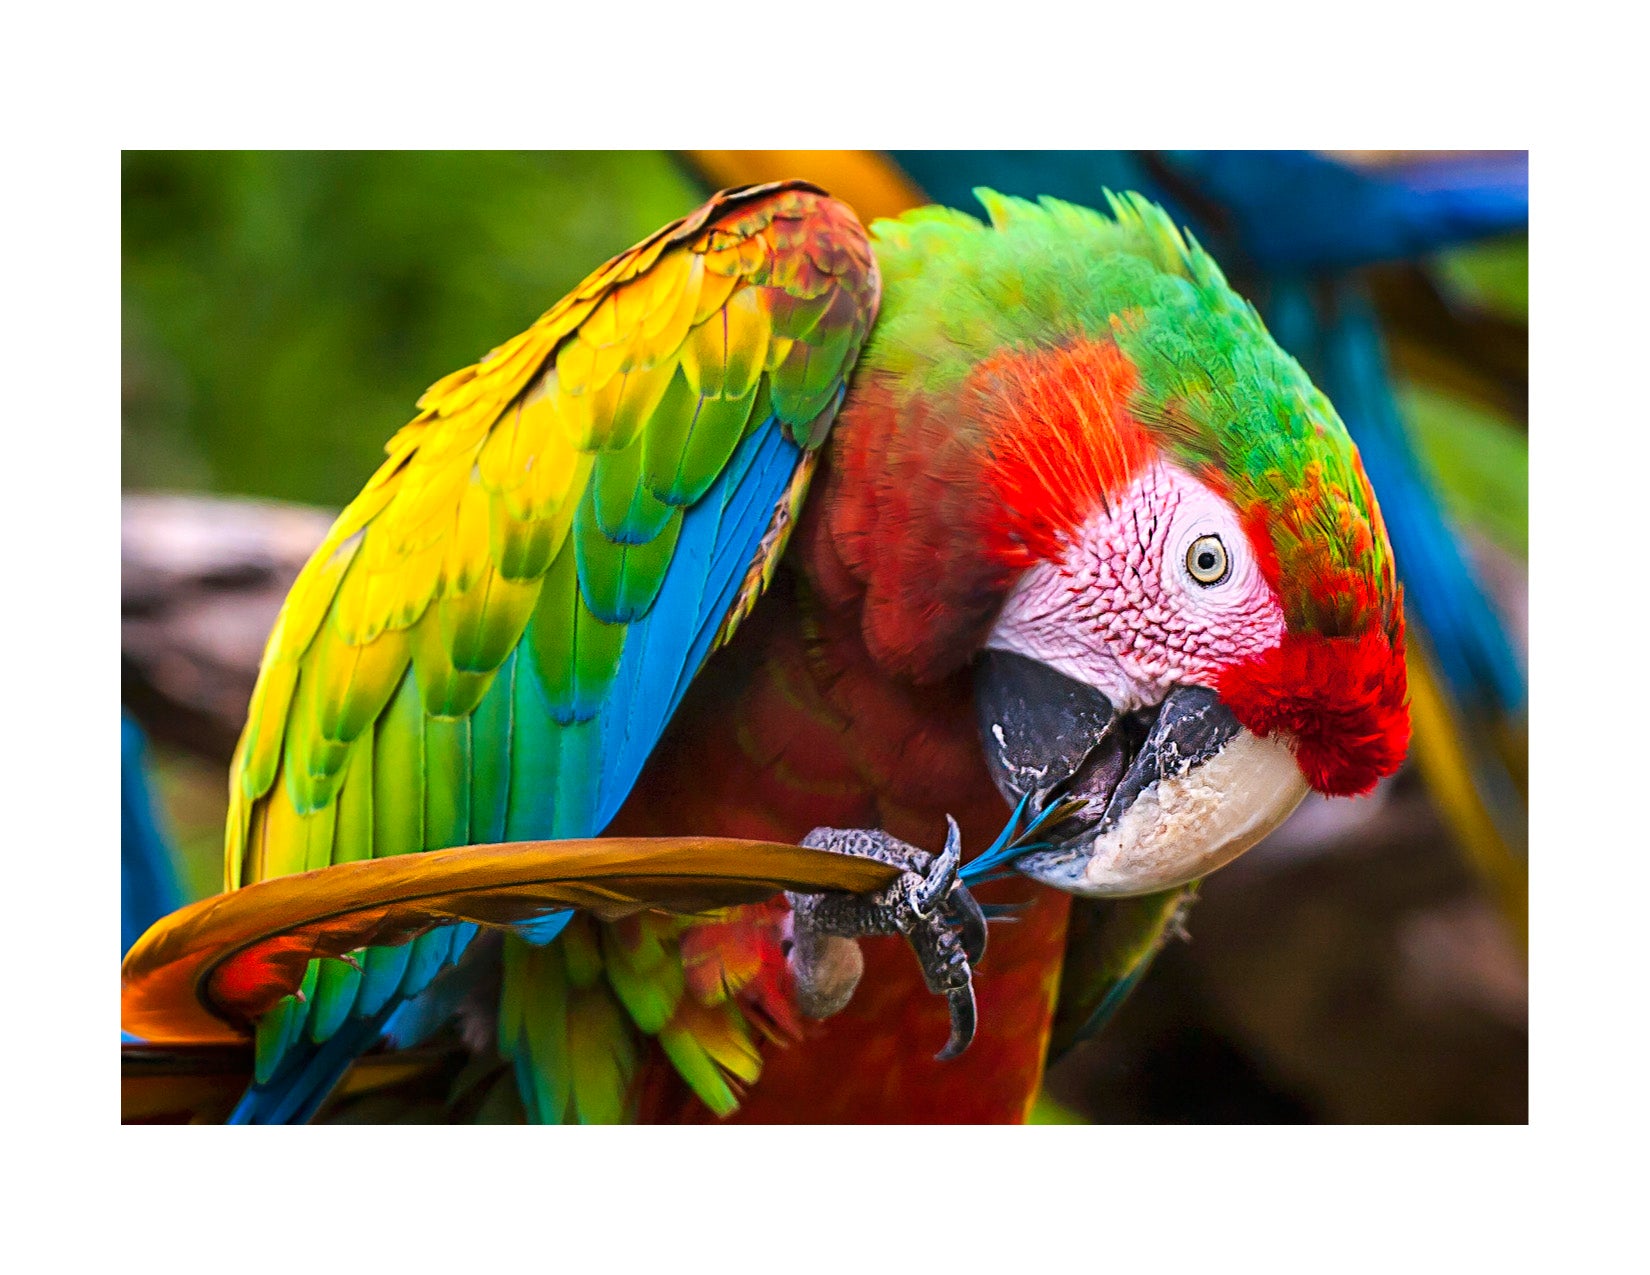 Photograph of a parrot preening